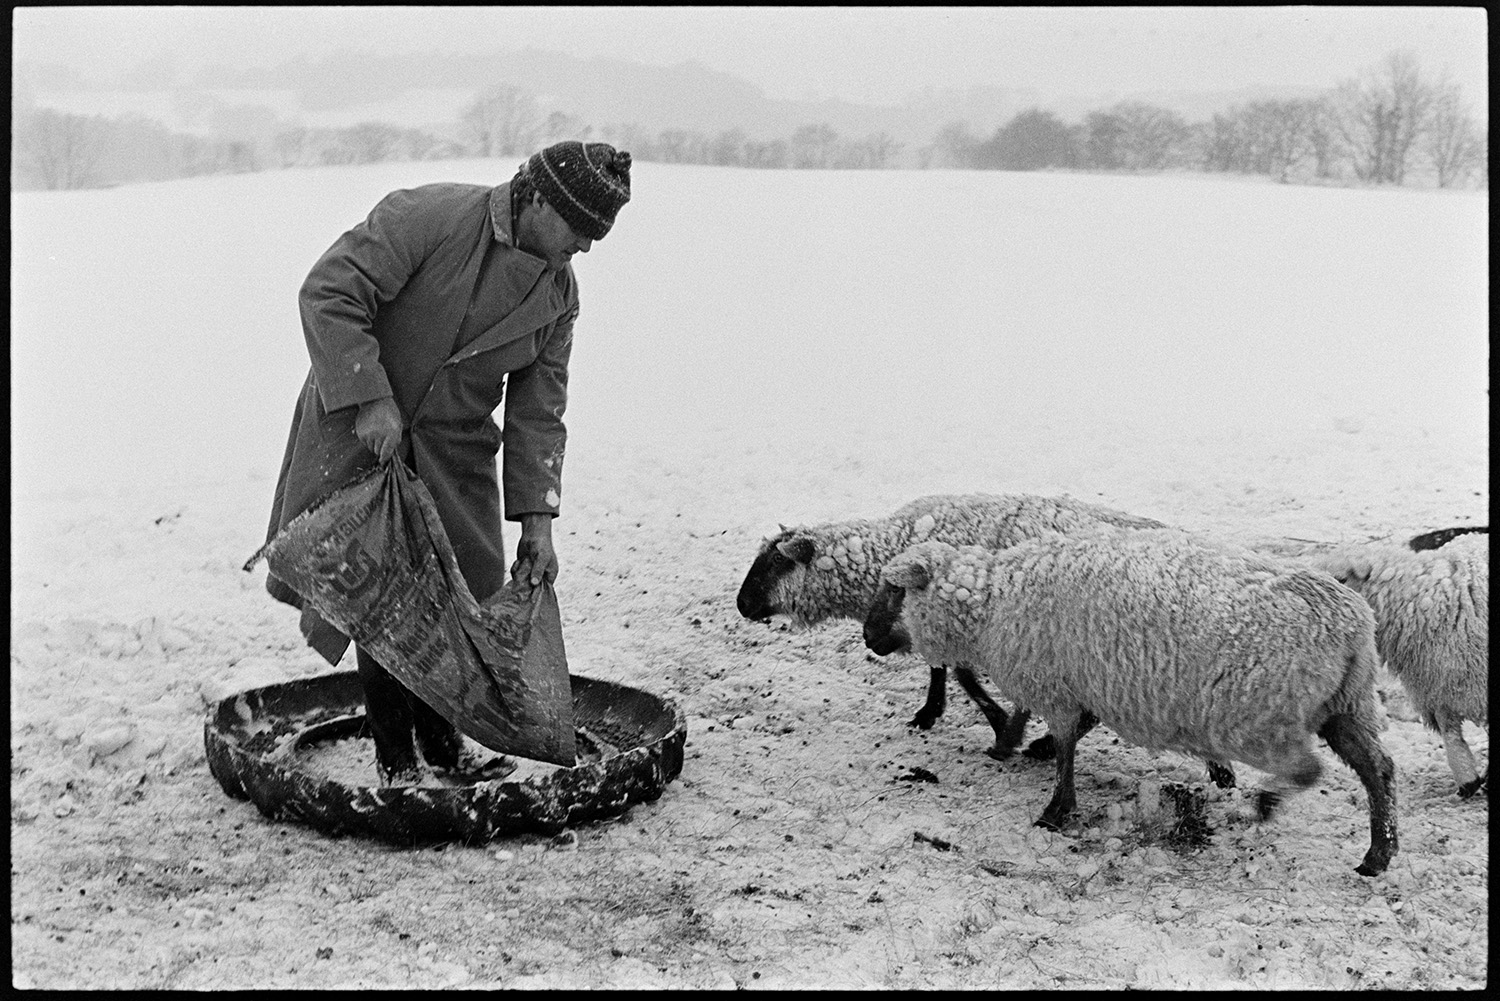 Snow, feeding hay to sheep after blizzard. 
[Alf Pugsley filling a tyre, which has been cut in half to use as a trough, with feed for sheep in a snow covered field at Lower Langham, Dolton. The sheep are making their way to the tyre.]